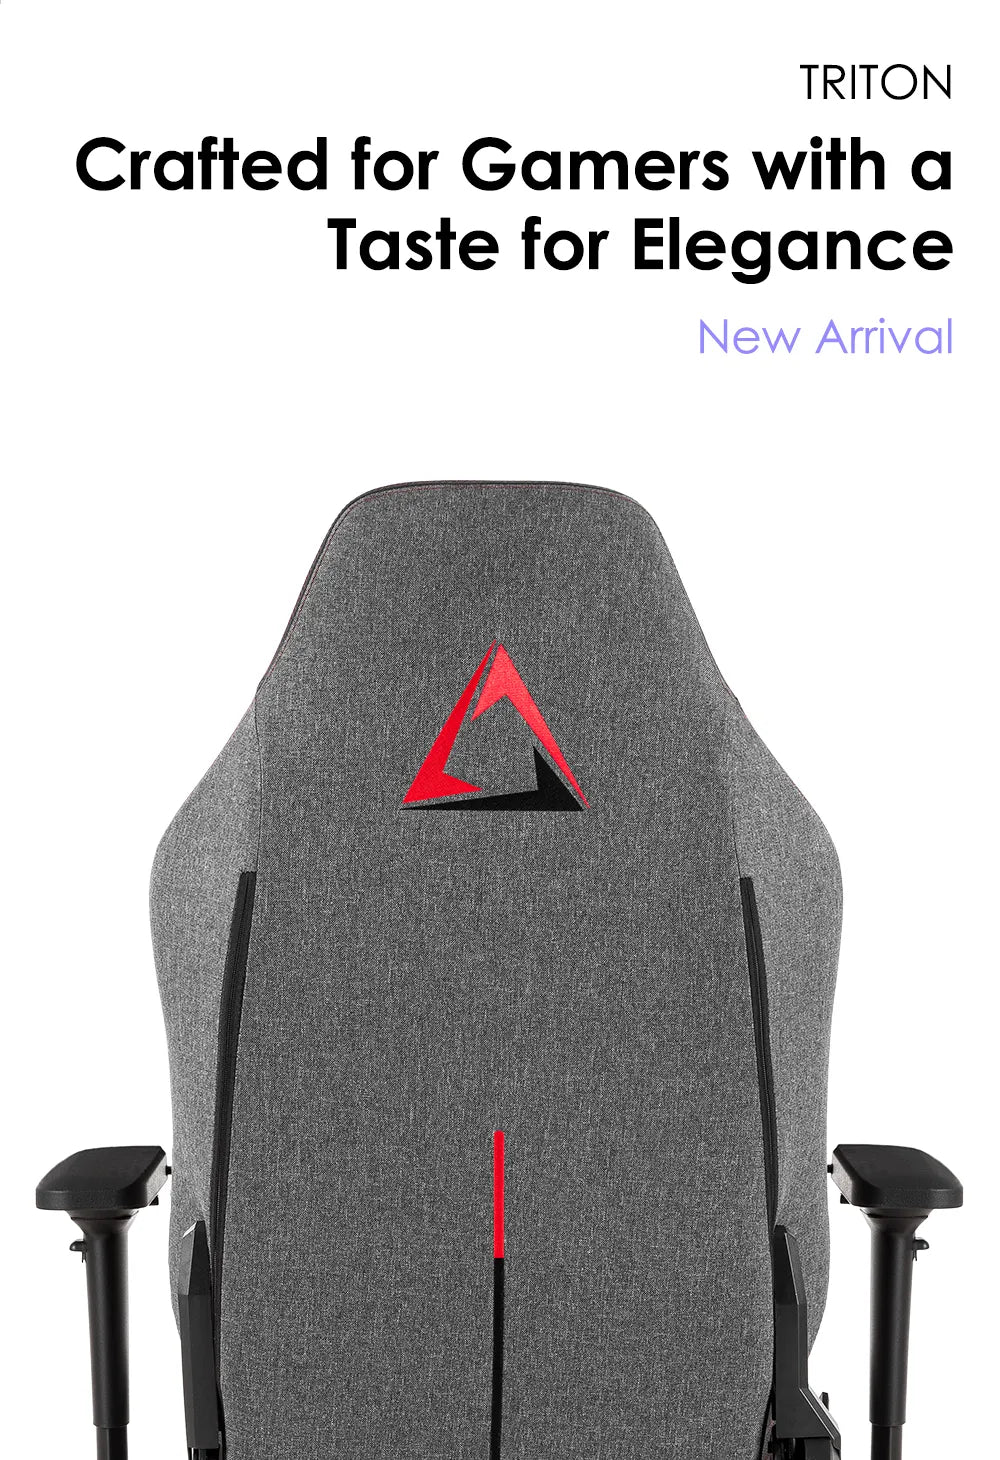 Elegant gaming chair with a minimalist grey design and a red triangle logo, marketed as 'Crafted for Gamers with a Taste for Elegance - New Arrival' by TRITON.